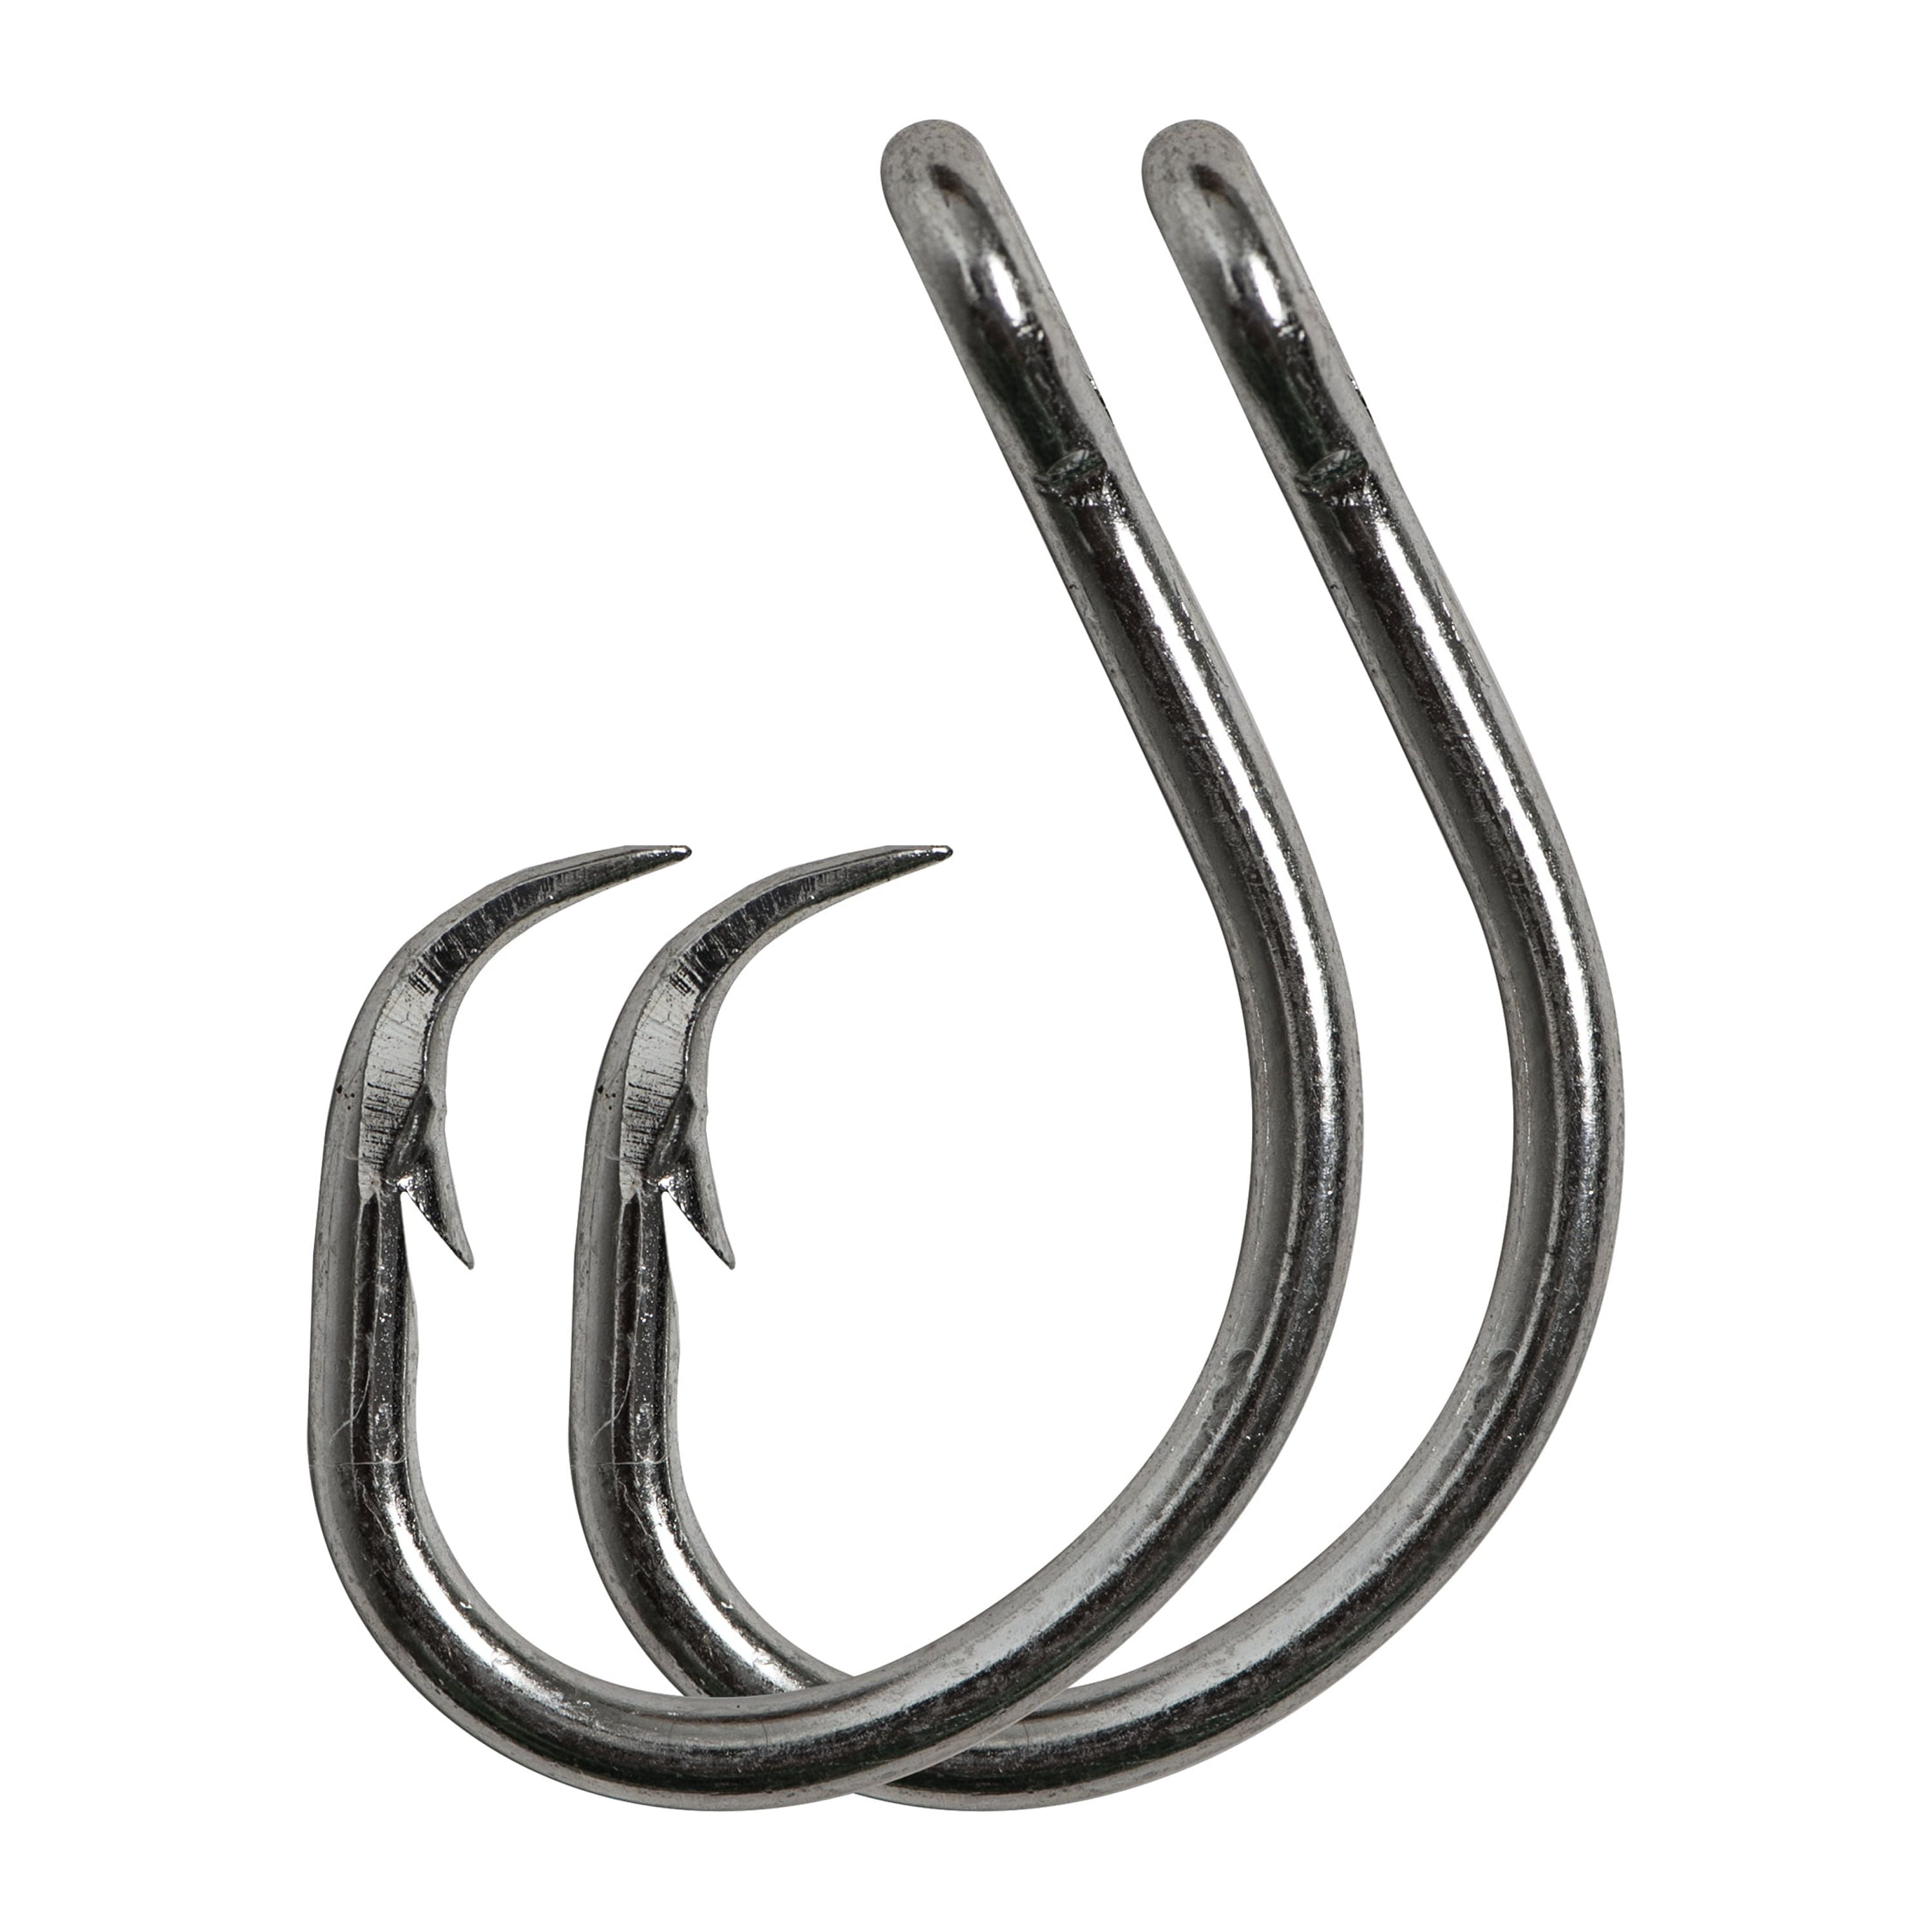  Mustad Snelled Central Draught Hook Fishing Terminal Tackle (6  Pack), Bronze, Size 24 : Sports & Outdoors